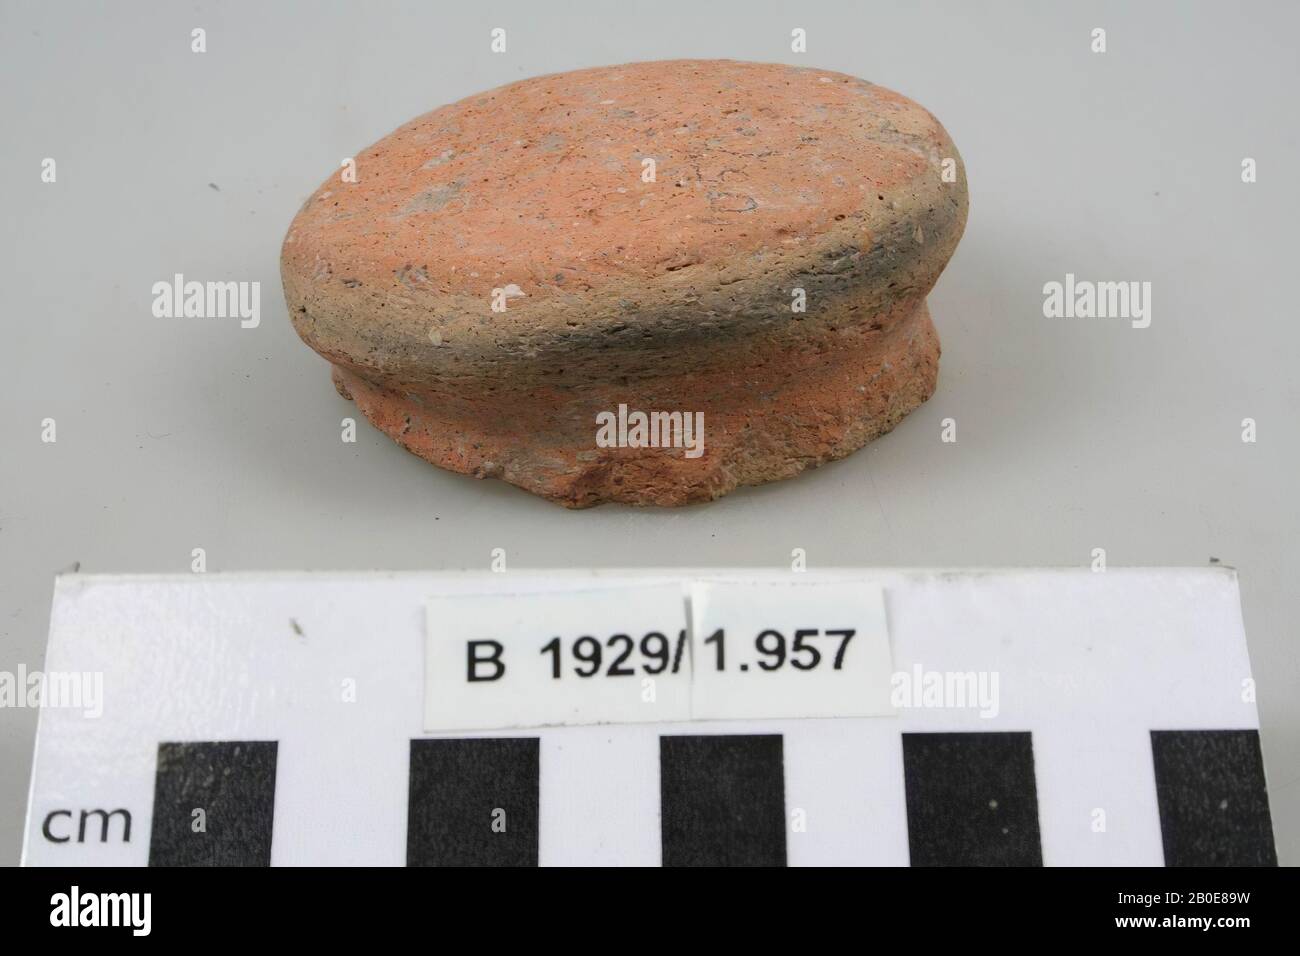 A bottom fragment of a jug, possibly reused as a lid., Crockery, earthenware, H 3.3 cm, D 7.3 cm, Palestine Stock Photo